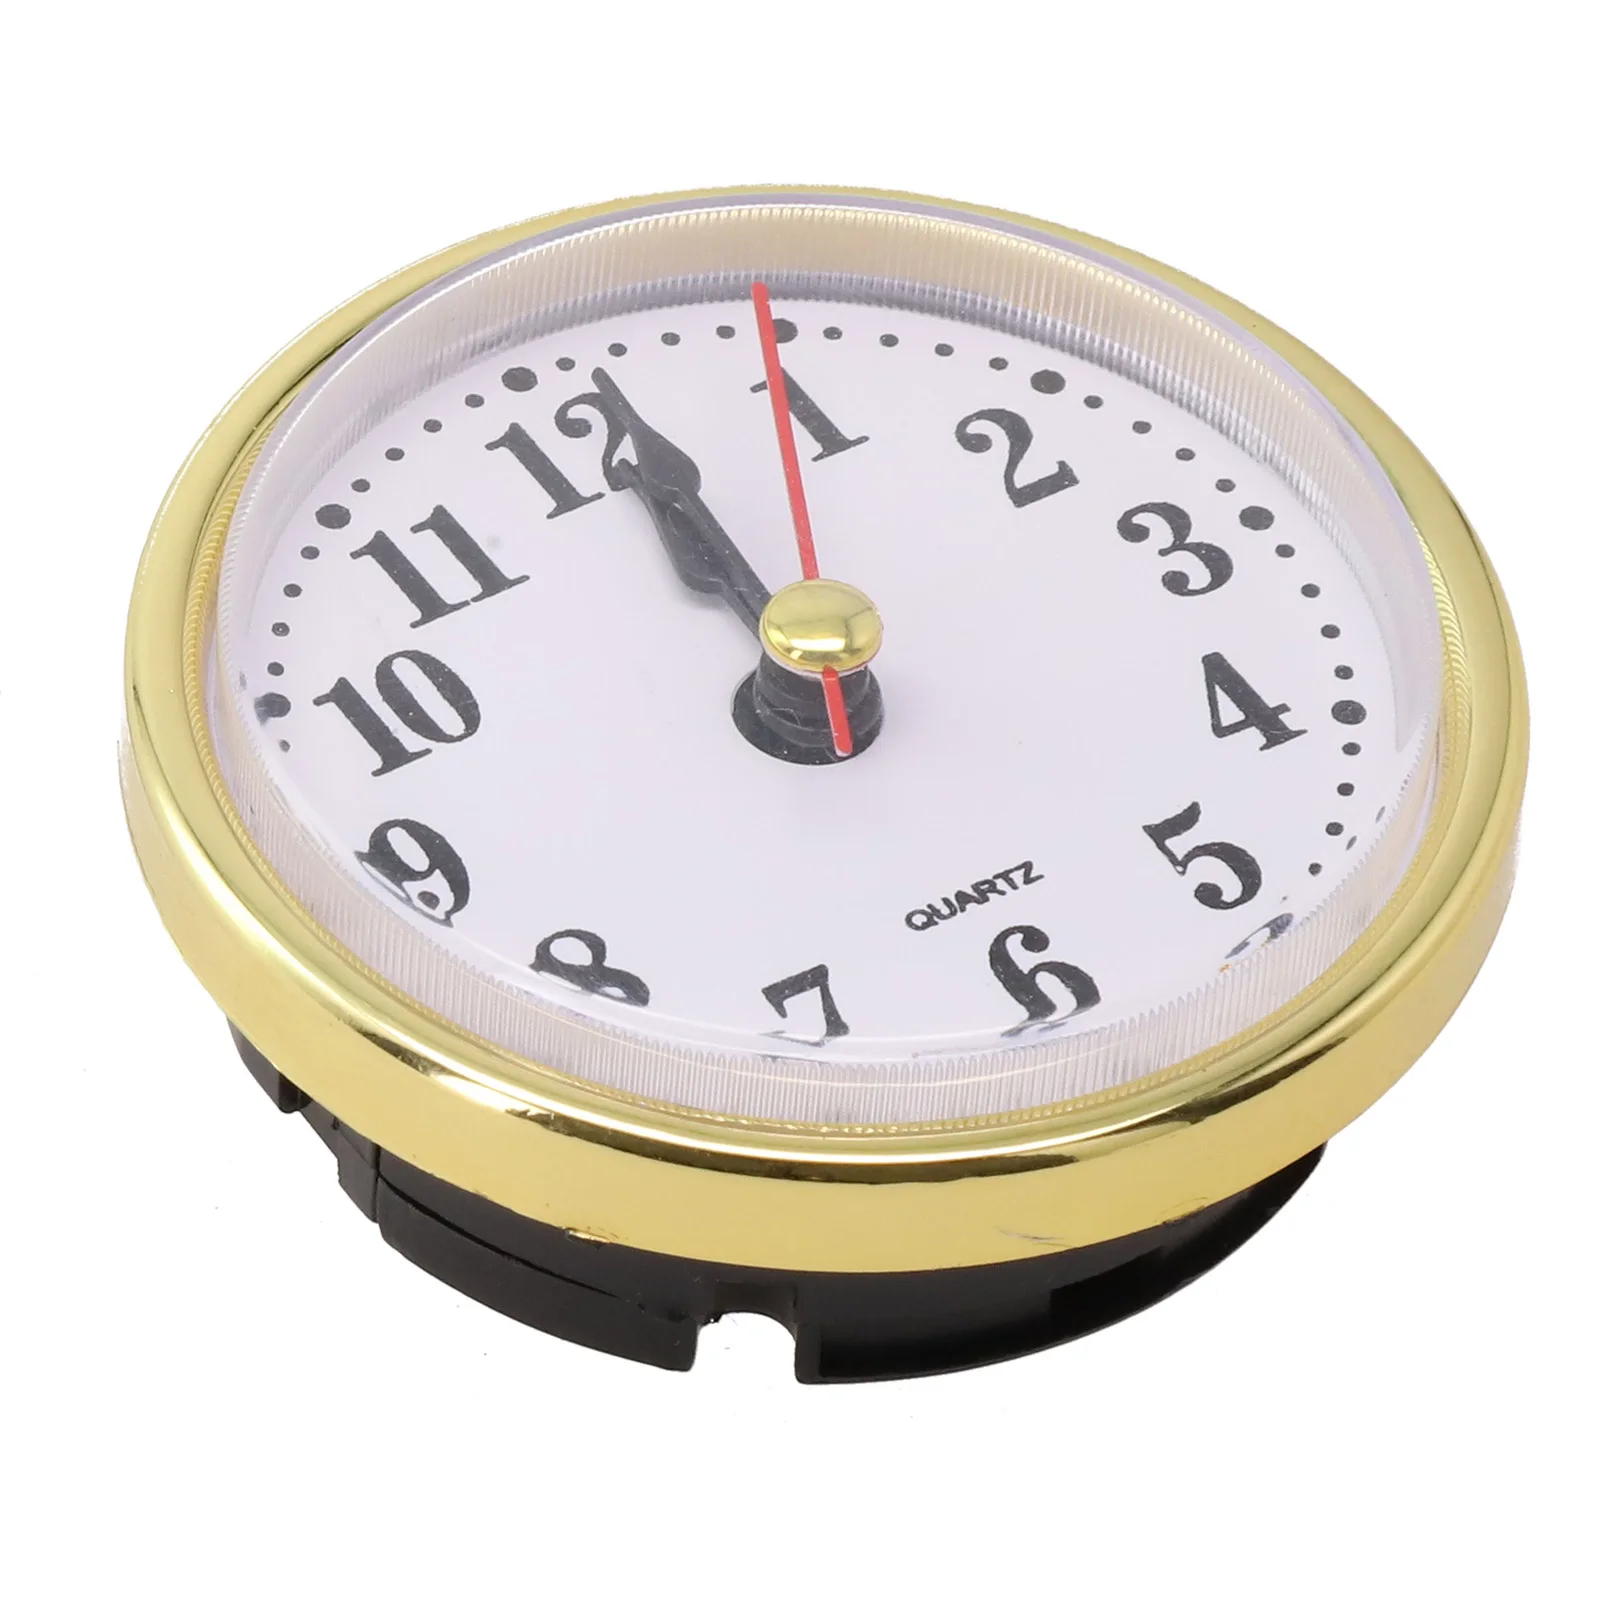 

Insert Quartz Clock Insert 30g Accessories DIY Gold Colored Trim Parts Affordable Brand New Durable And Practical